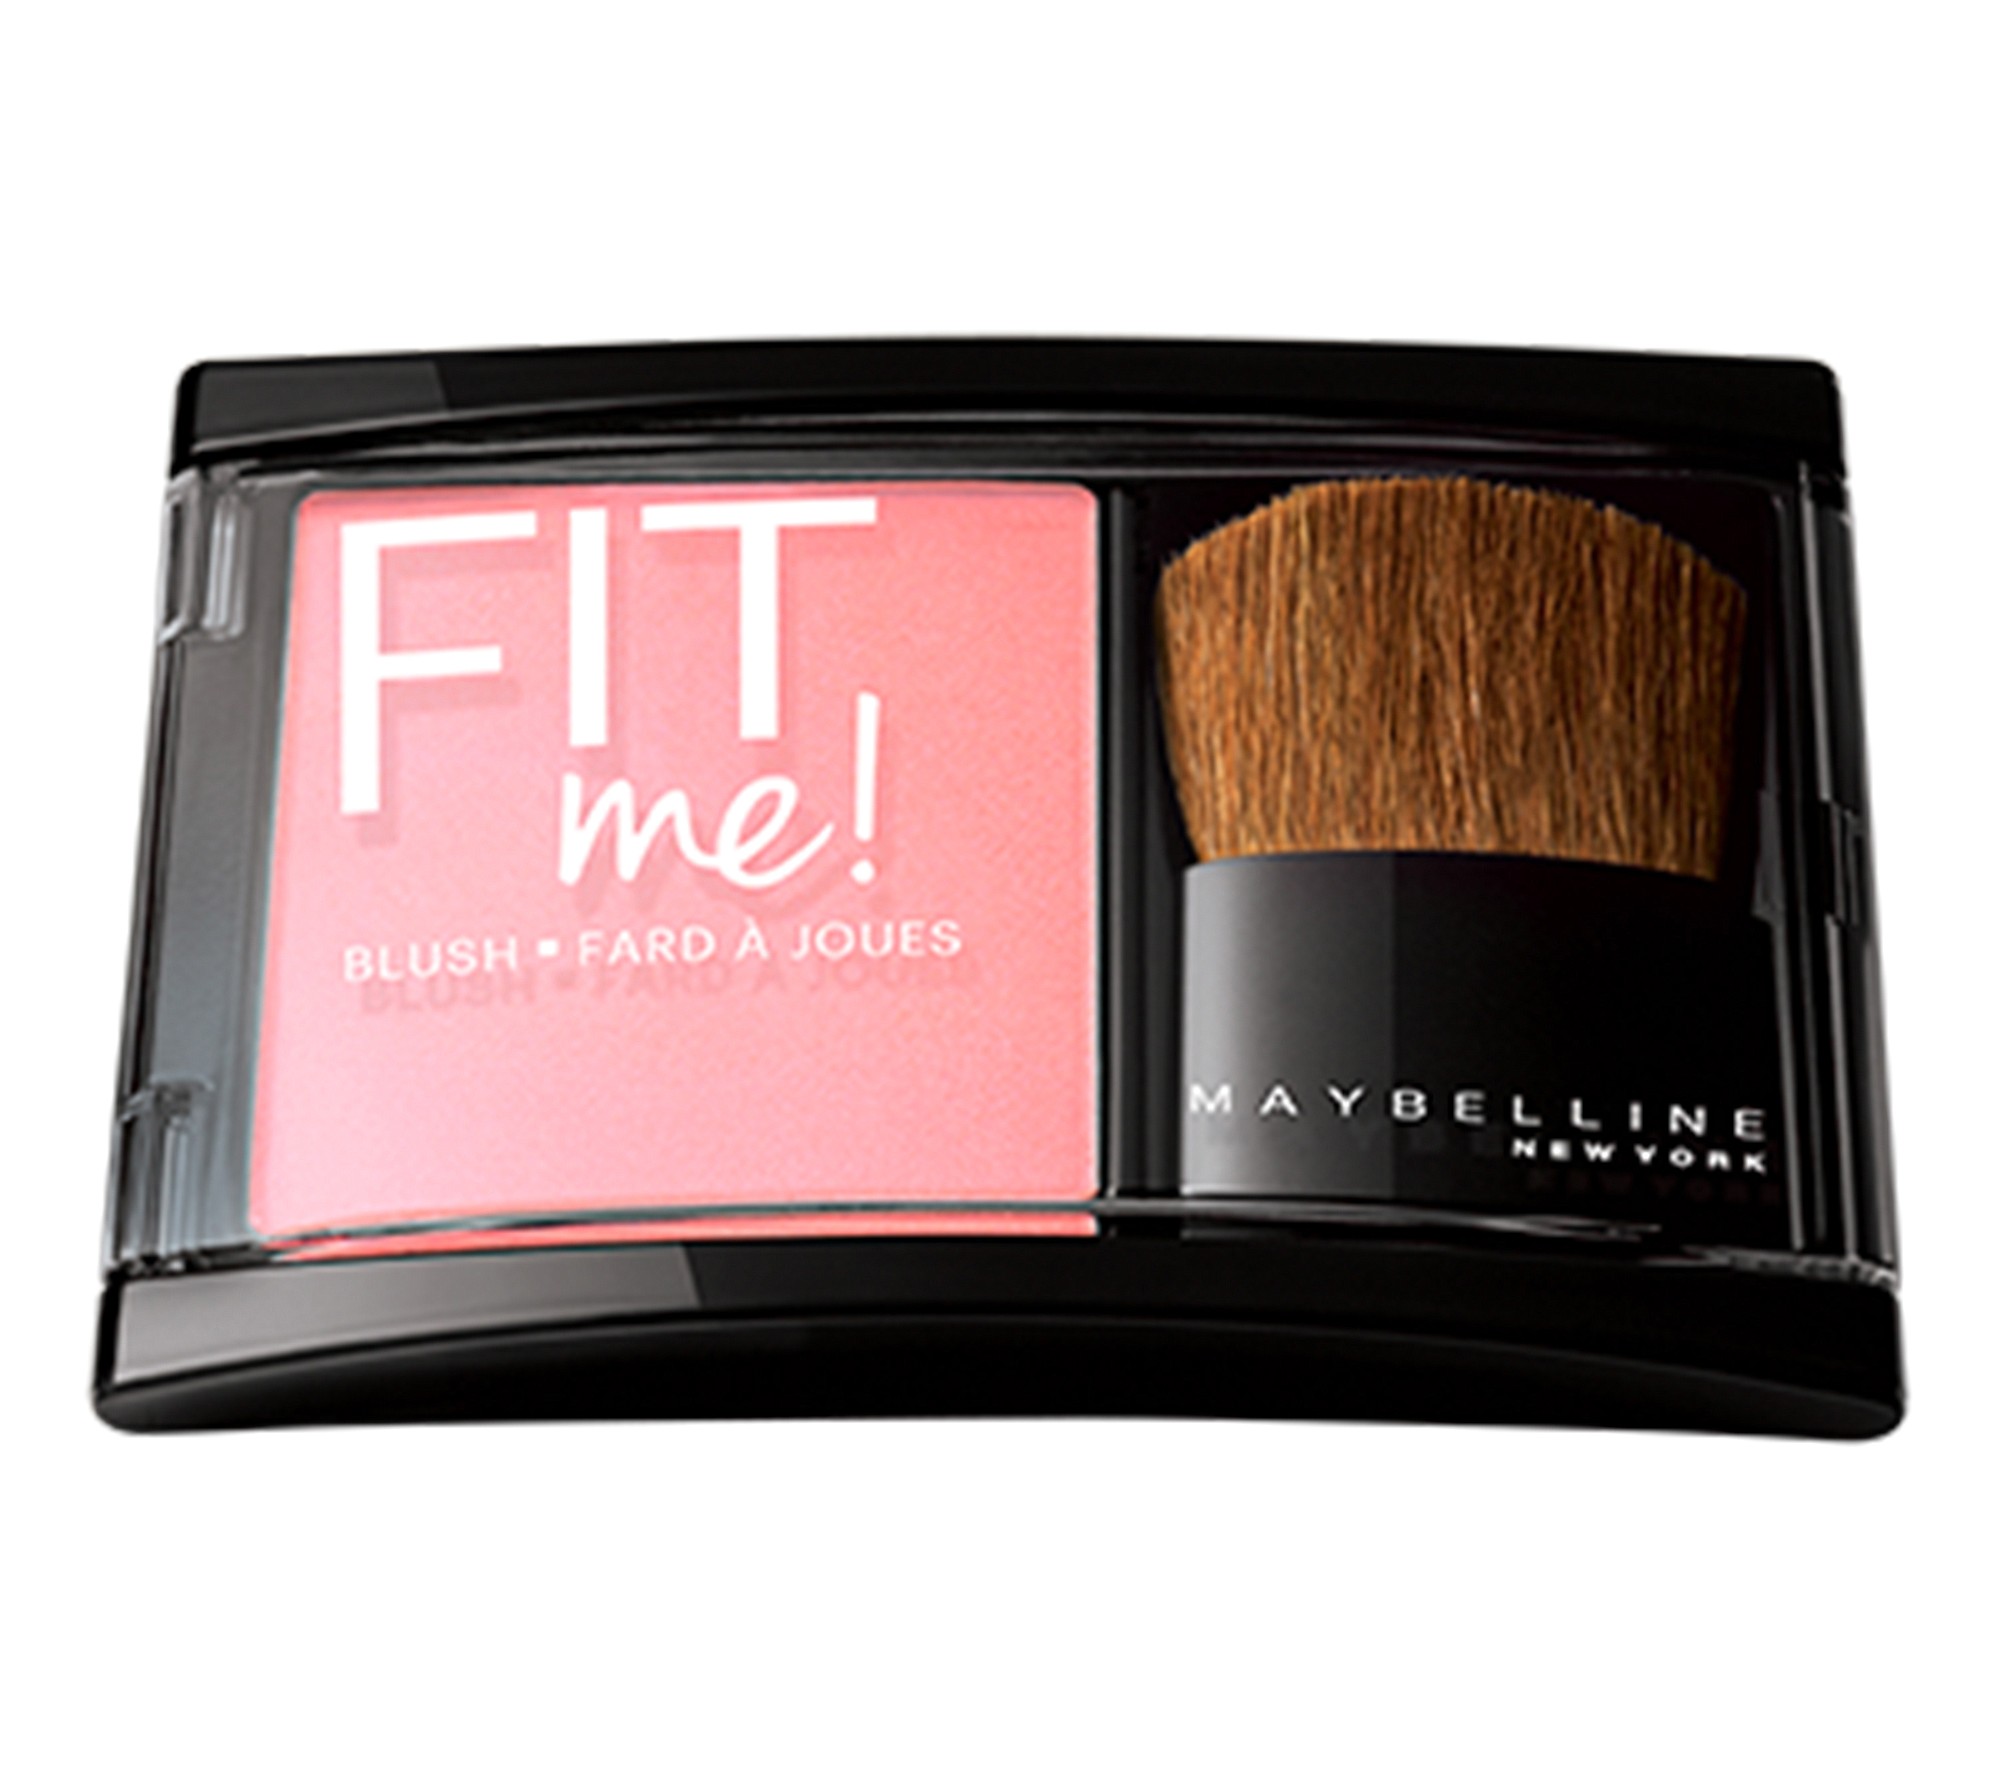 Since the 1970s, Maybelline has been known for much more than eye makeup and today offers lip, nail and face products like this Fit Me Blush.